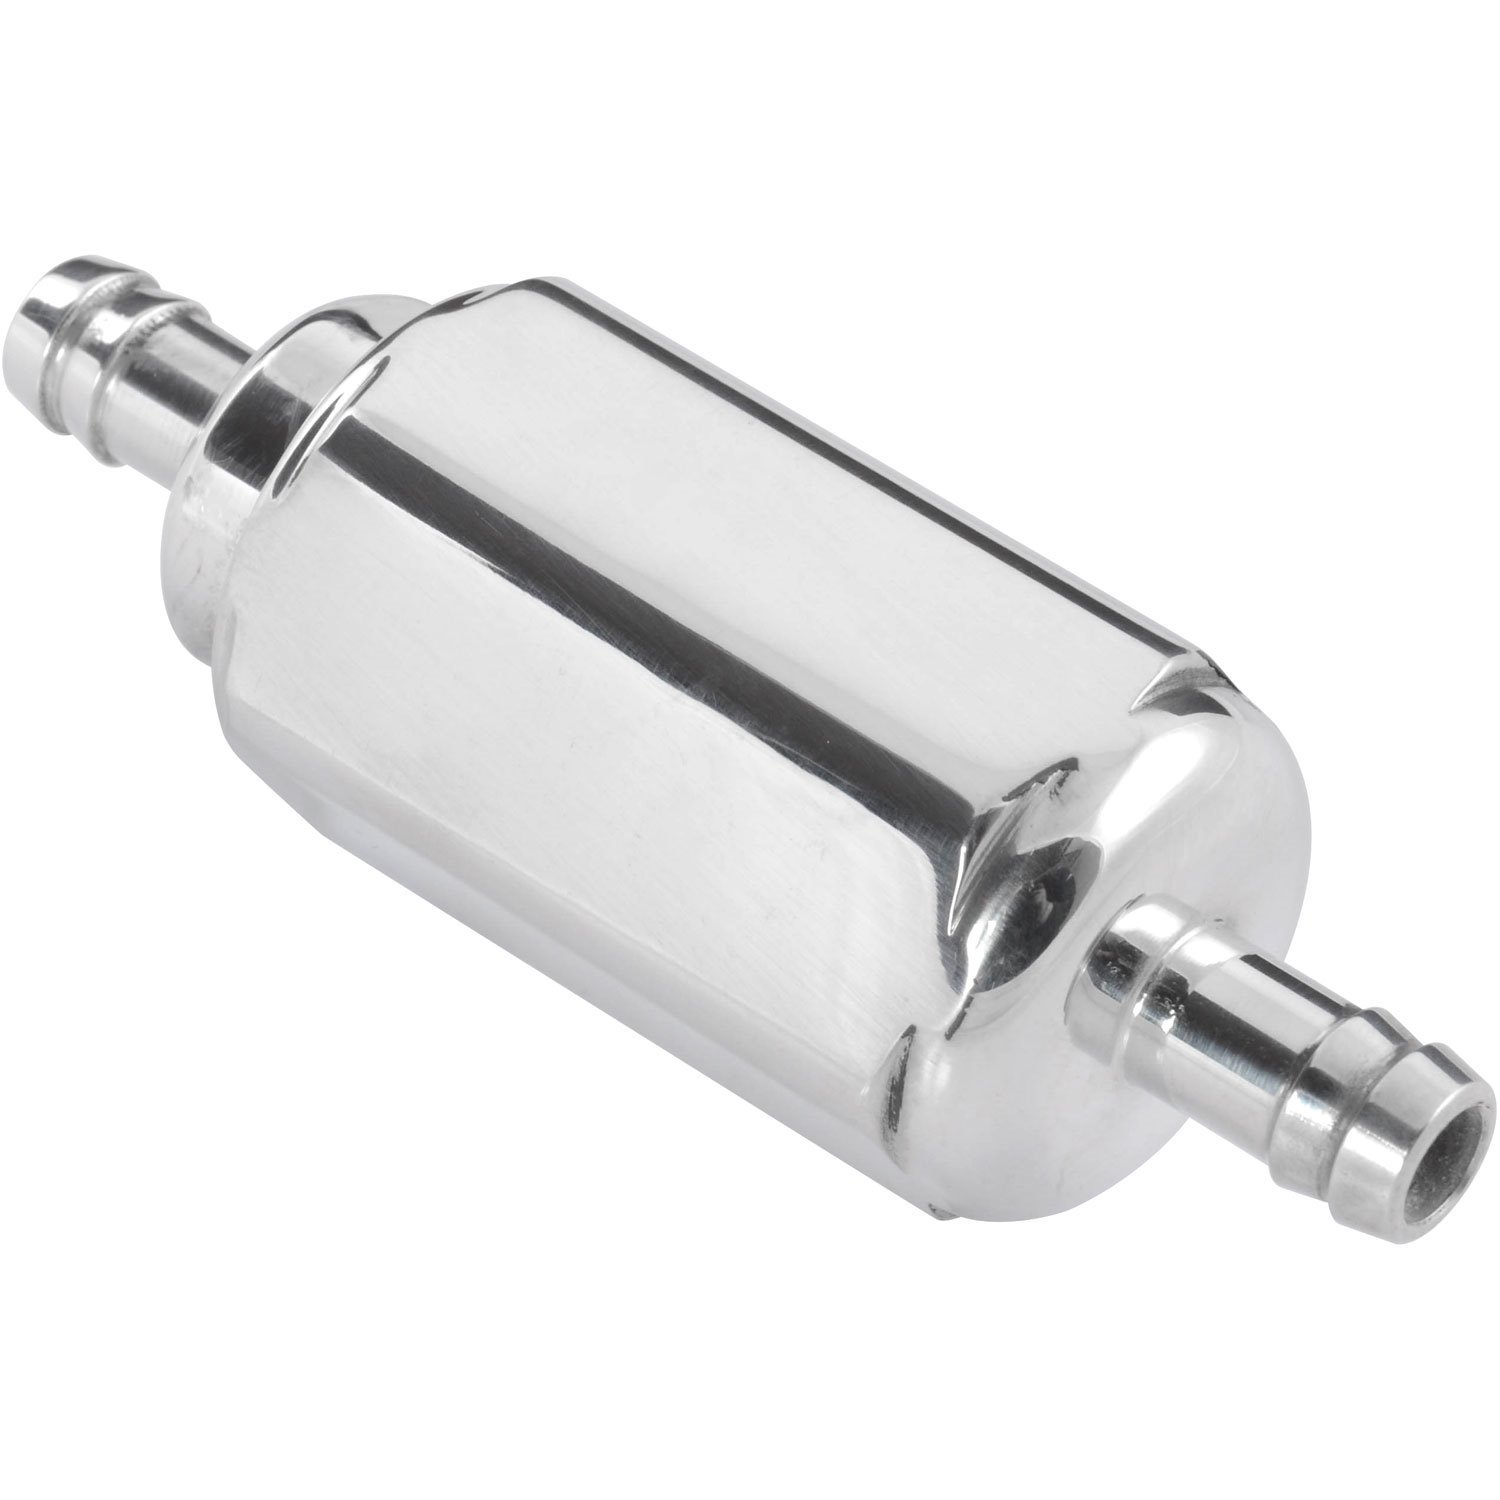 Compact Billet In-Line Fuel Filter 3/8" Male/Male Hose Barb